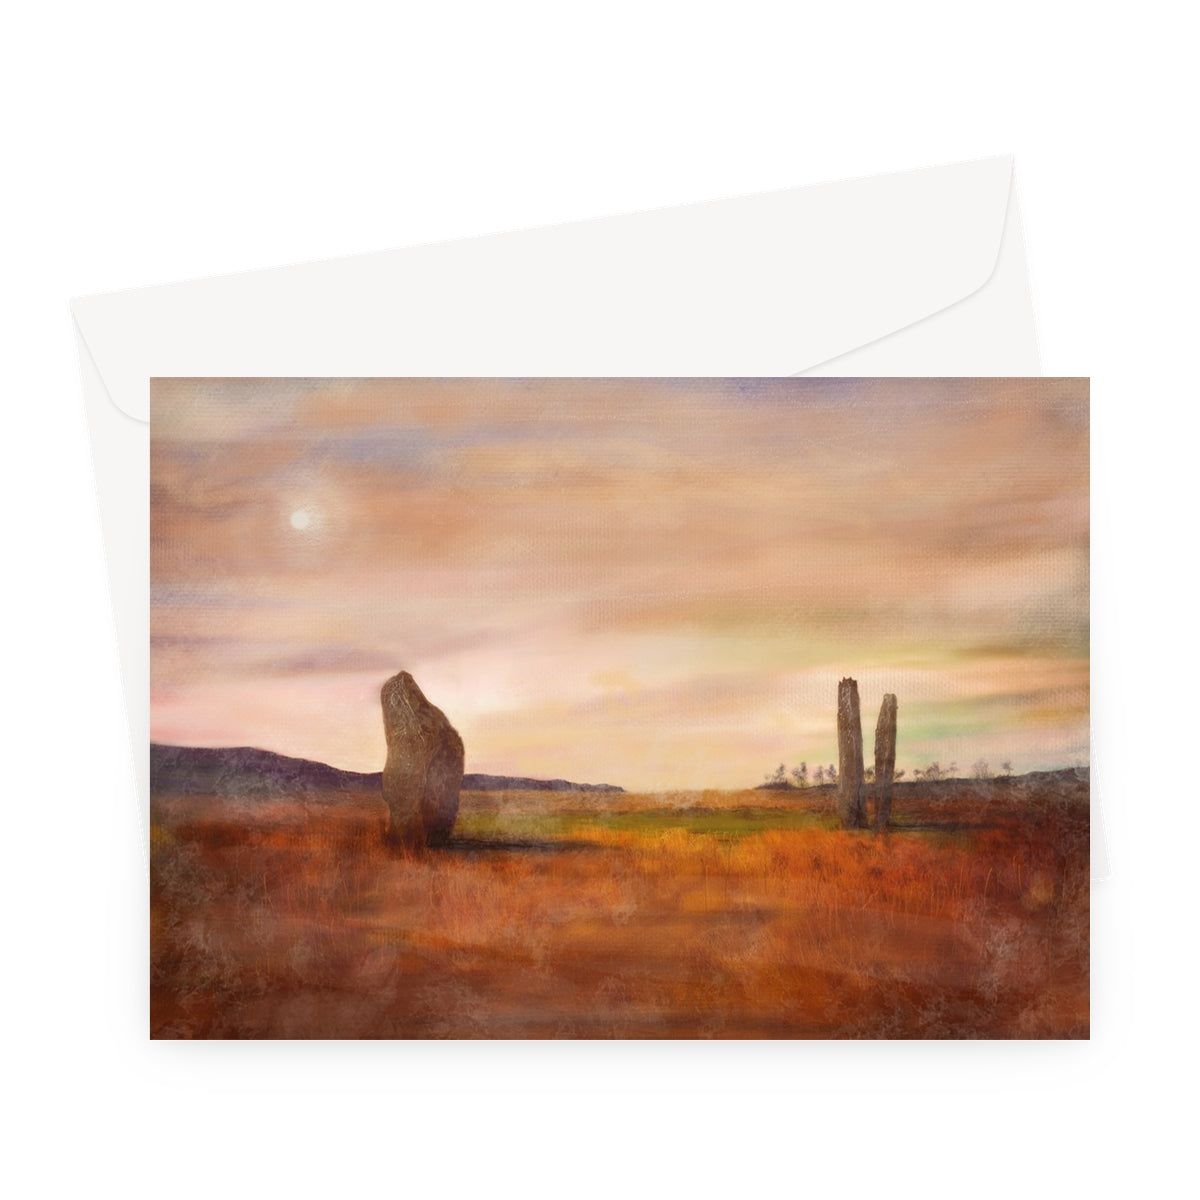 Machrie Moor Arran Art Gifts Greeting Card-Greetings Cards-Arran Art Gallery-A5 Landscape-10 Cards-Paintings, Prints, Homeware, Art Gifts From Scotland By Scottish Artist Kevin Hunter